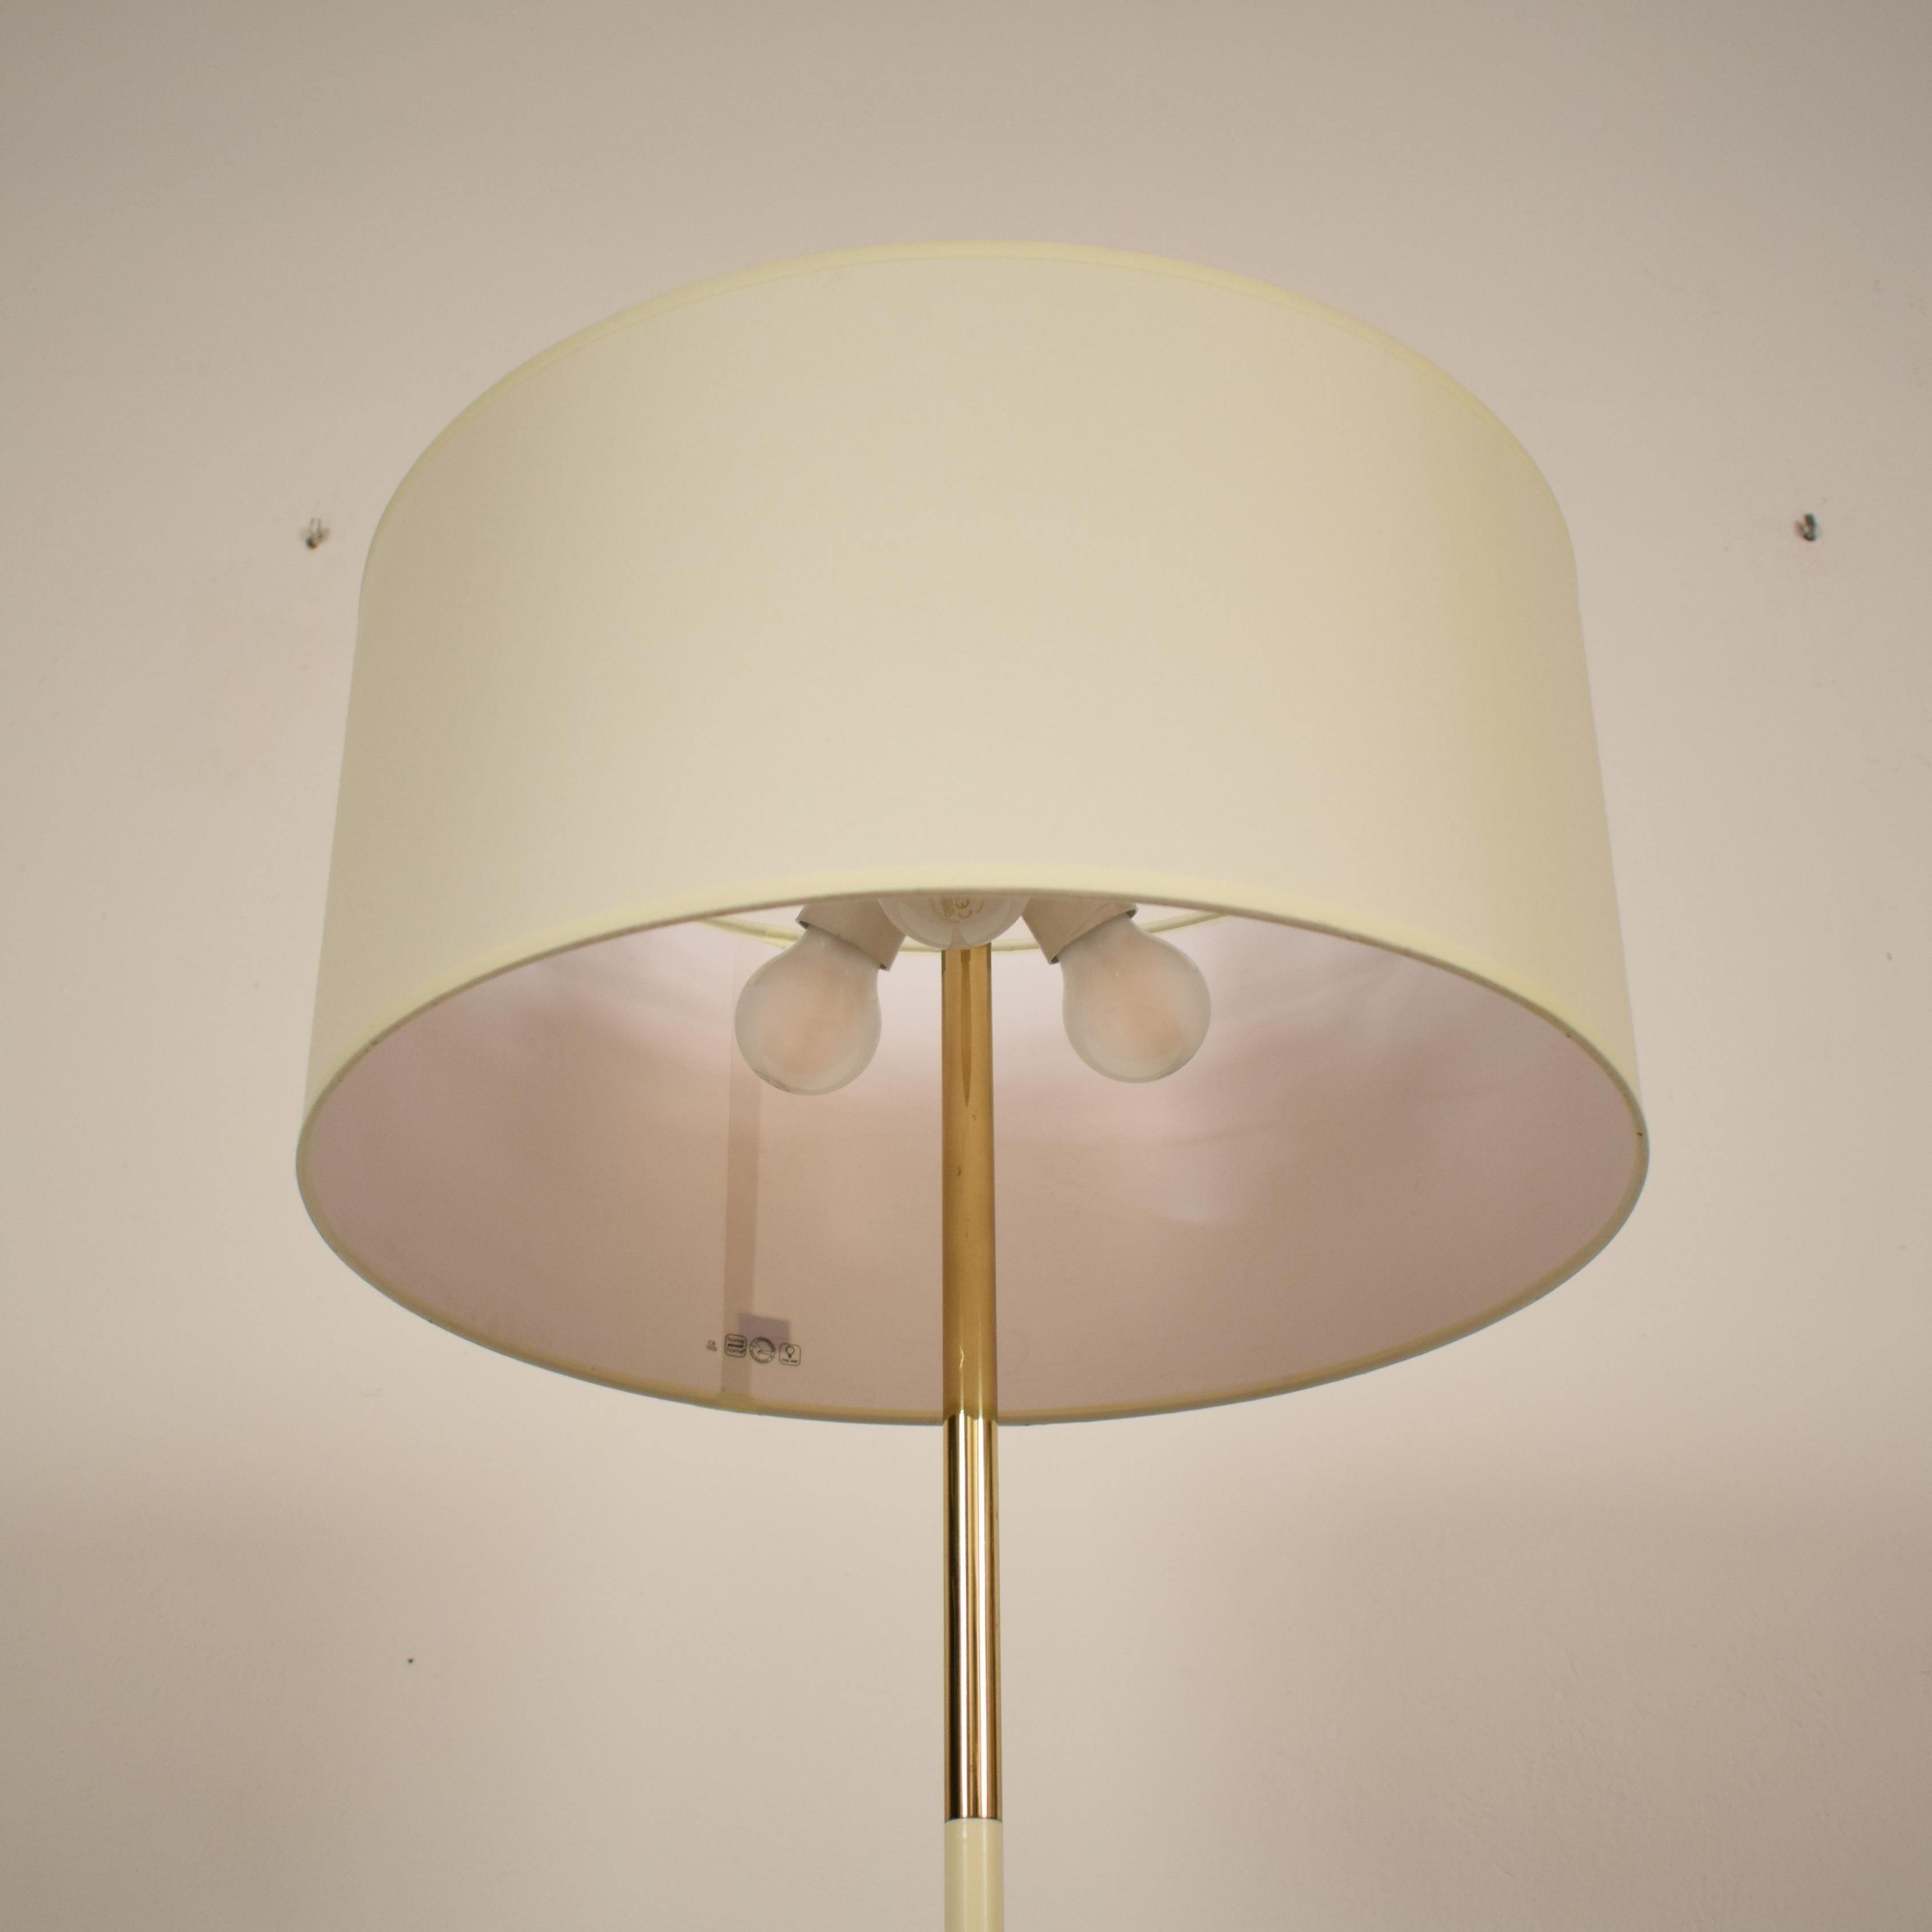 German Midcentury Brass and Lacquered Metal Floor Lamp